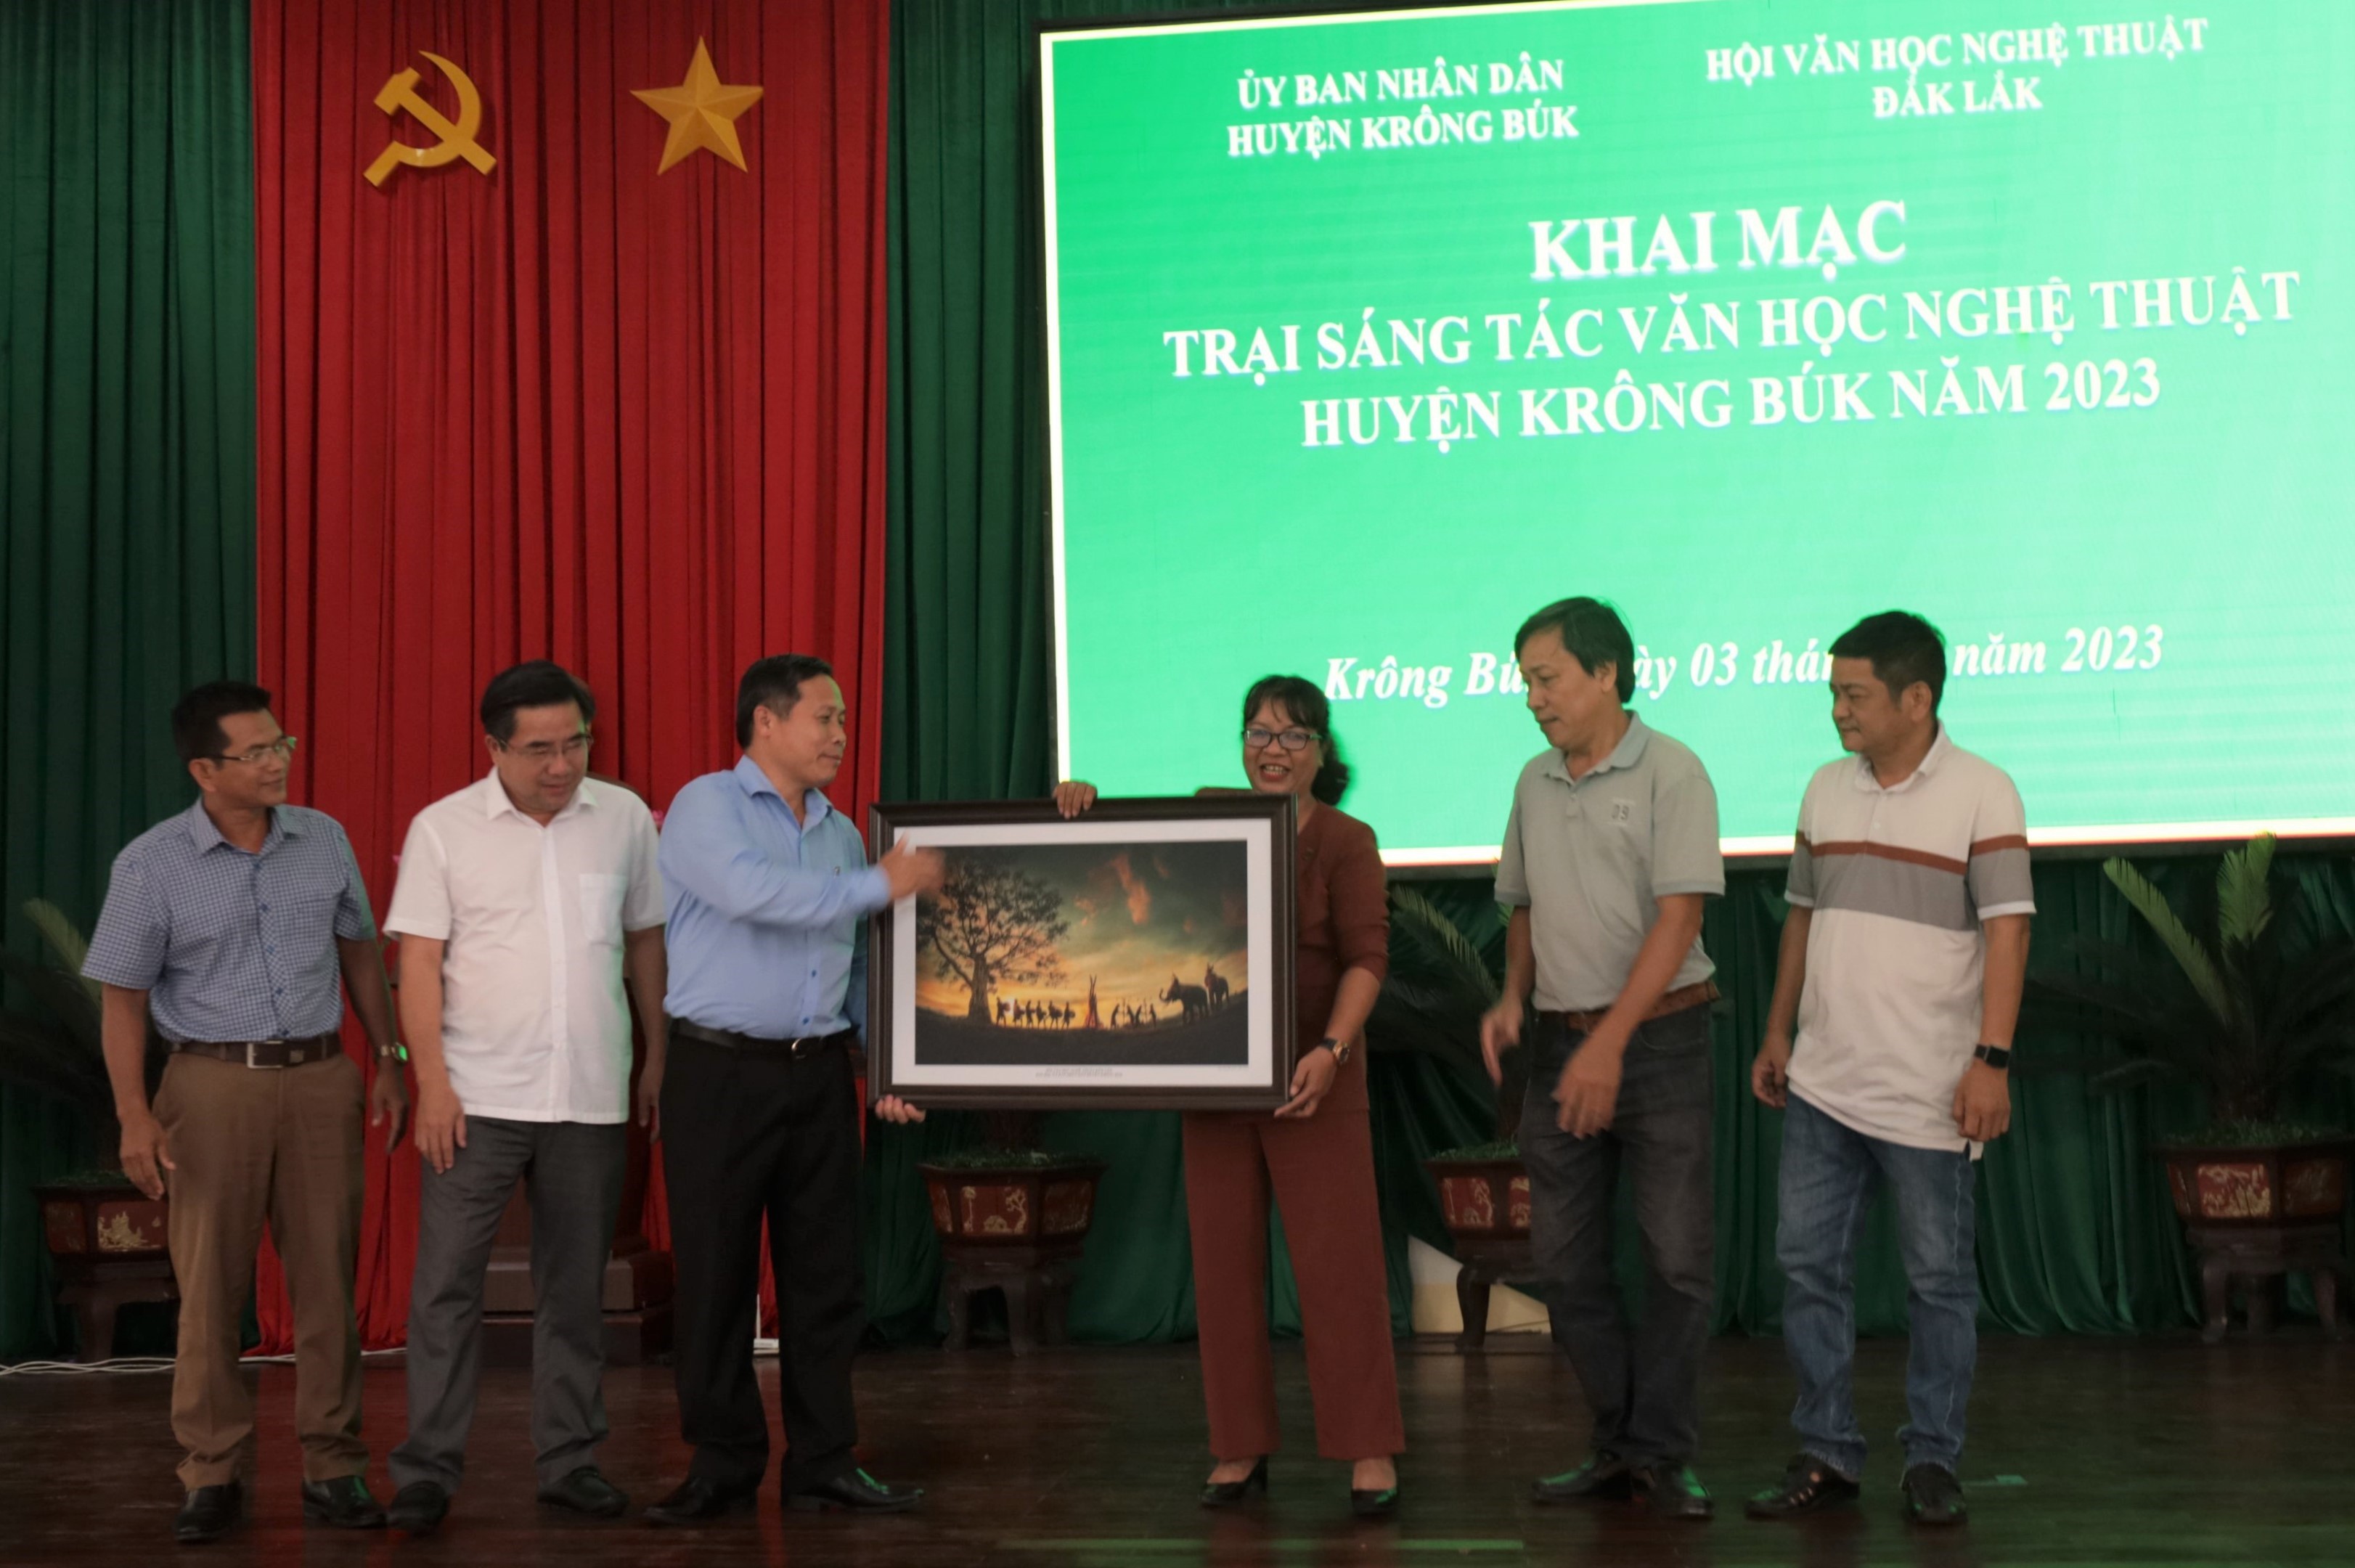 Opening of the 2023 Literature and Arts Creative Camp in Krong Buk District